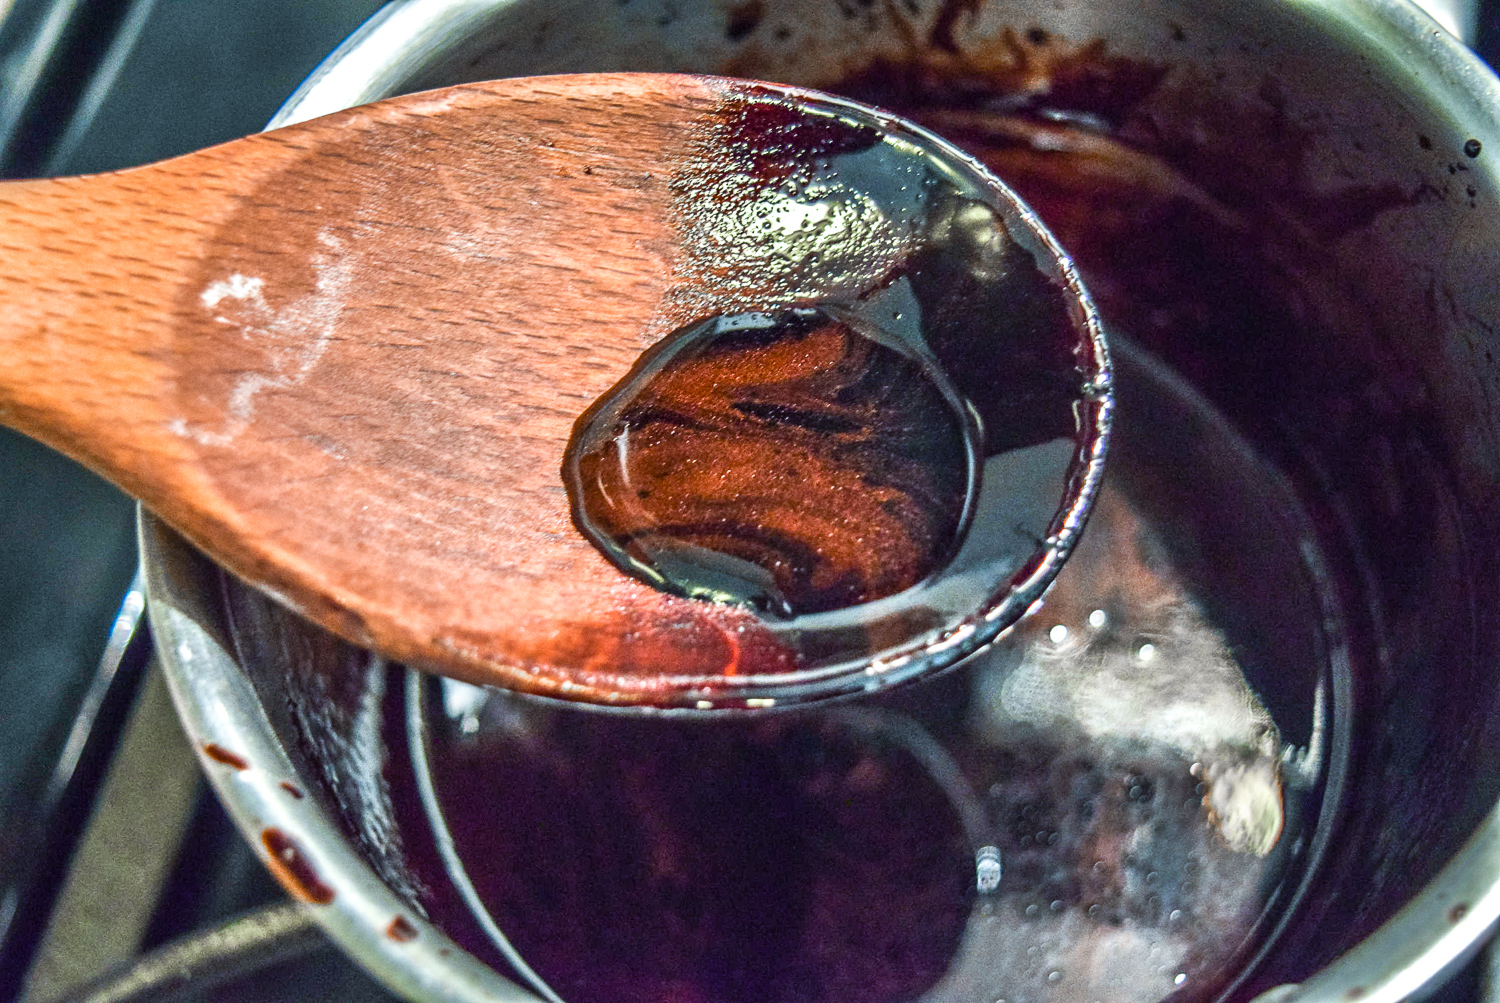 Finished balsamic reduction in spoon for caprese bruschetta